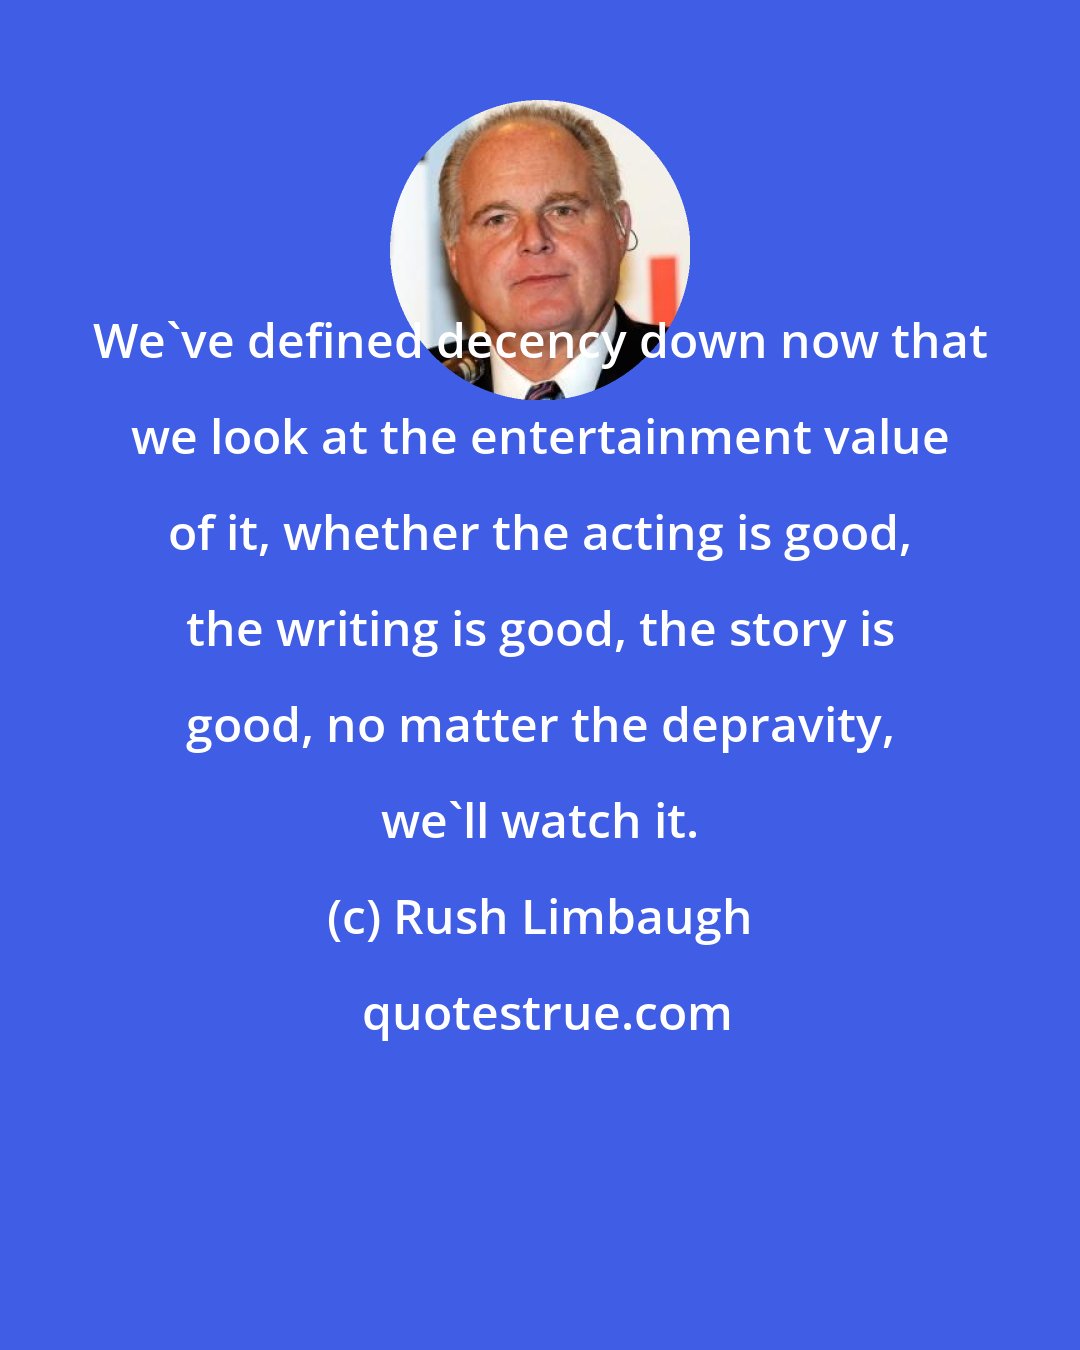 Rush Limbaugh: We've defined decency down now that we look at the entertainment value of it, whether the acting is good, the writing is good, the story is good, no matter the depravity, we'll watch it.